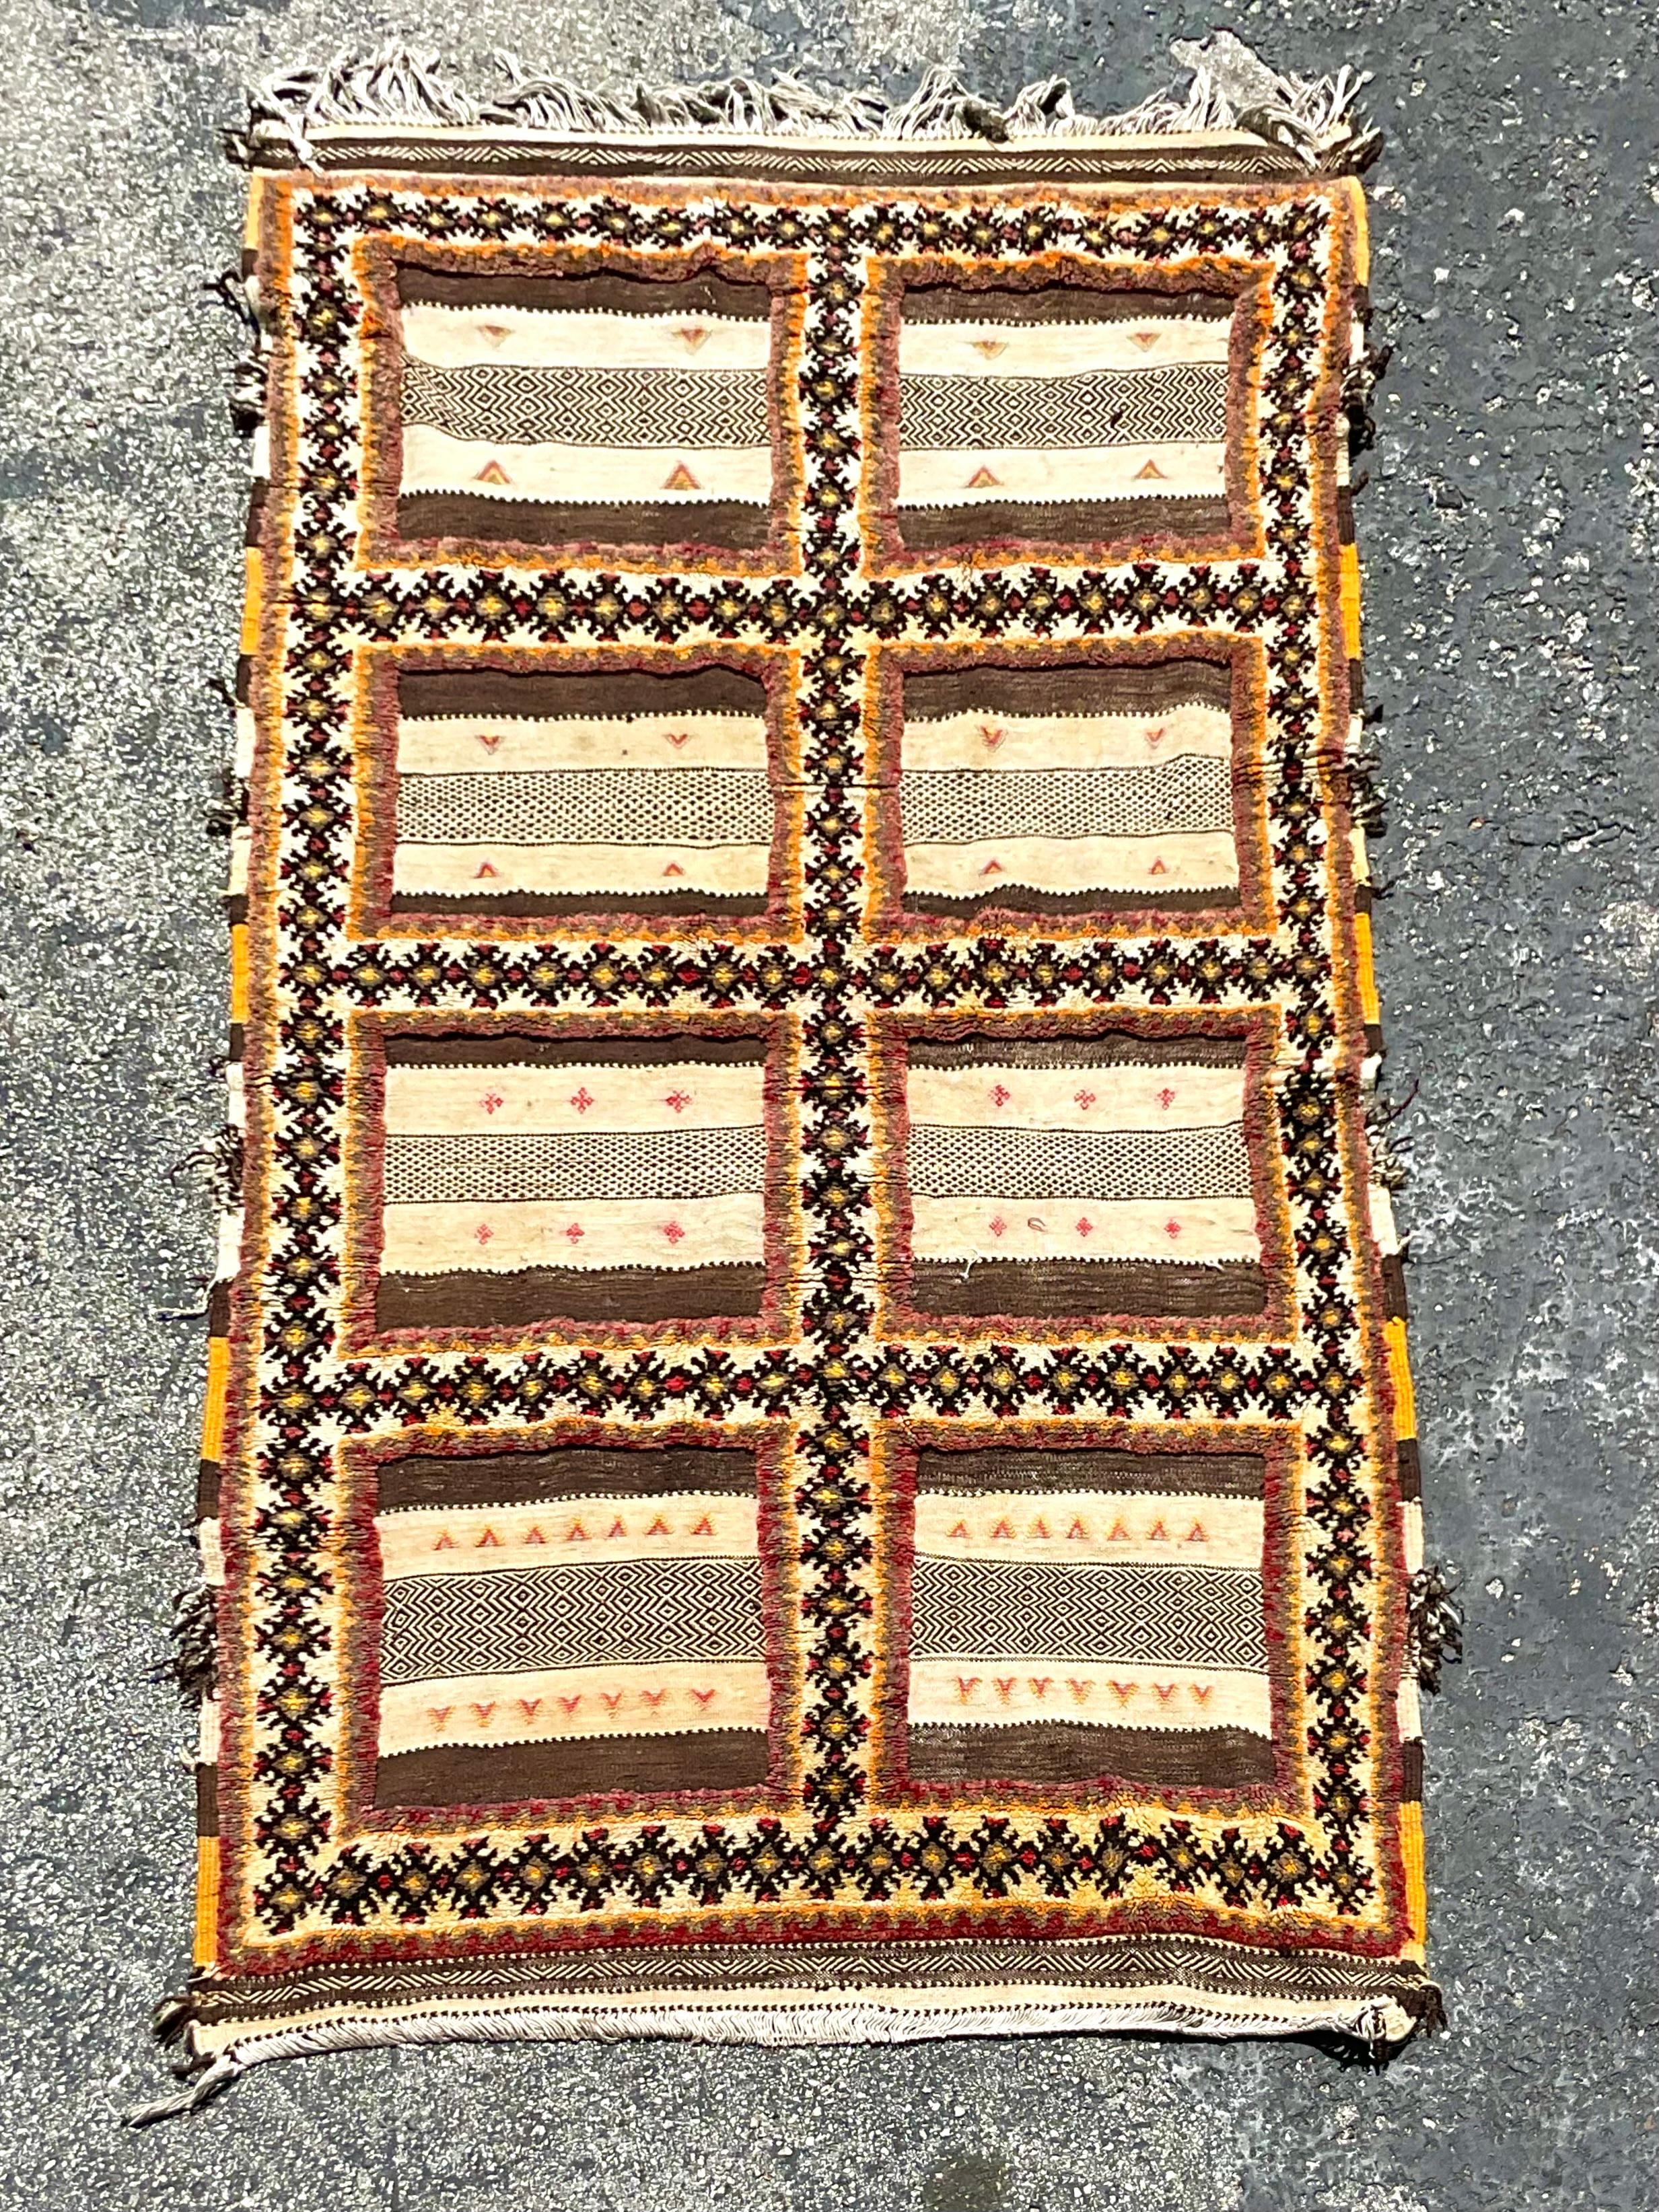 A beautiful Turkish striped rug with an intriguing pallet of vibrant and rich colorways. Acquired from a Palm Beach estate.